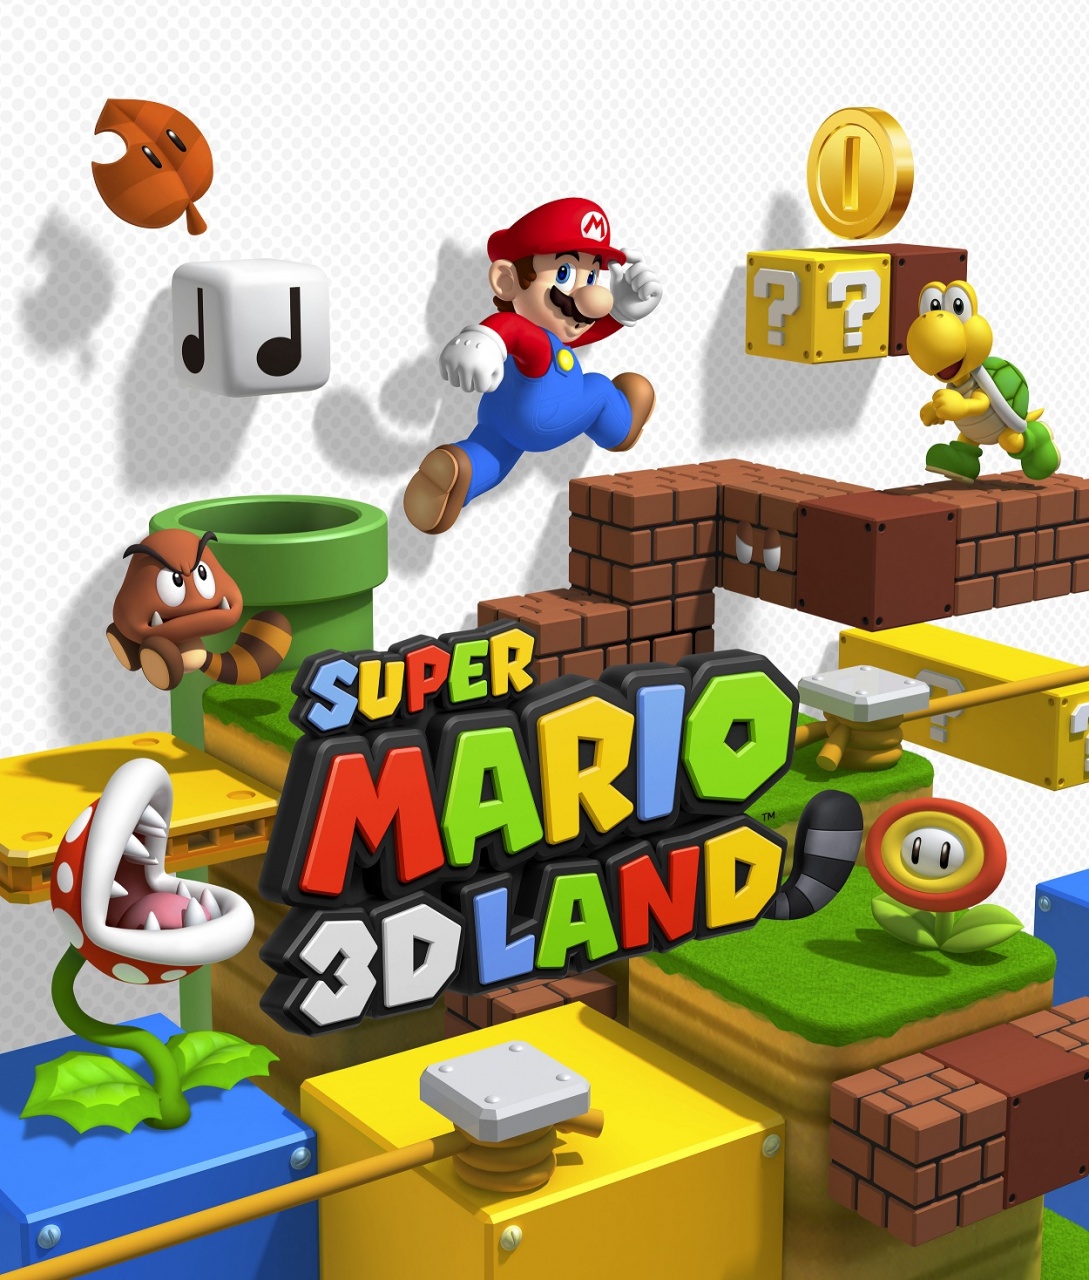 HD Quality Wallpaper | Collection: Video Game, 1089x1280 Super Mario 3D Land